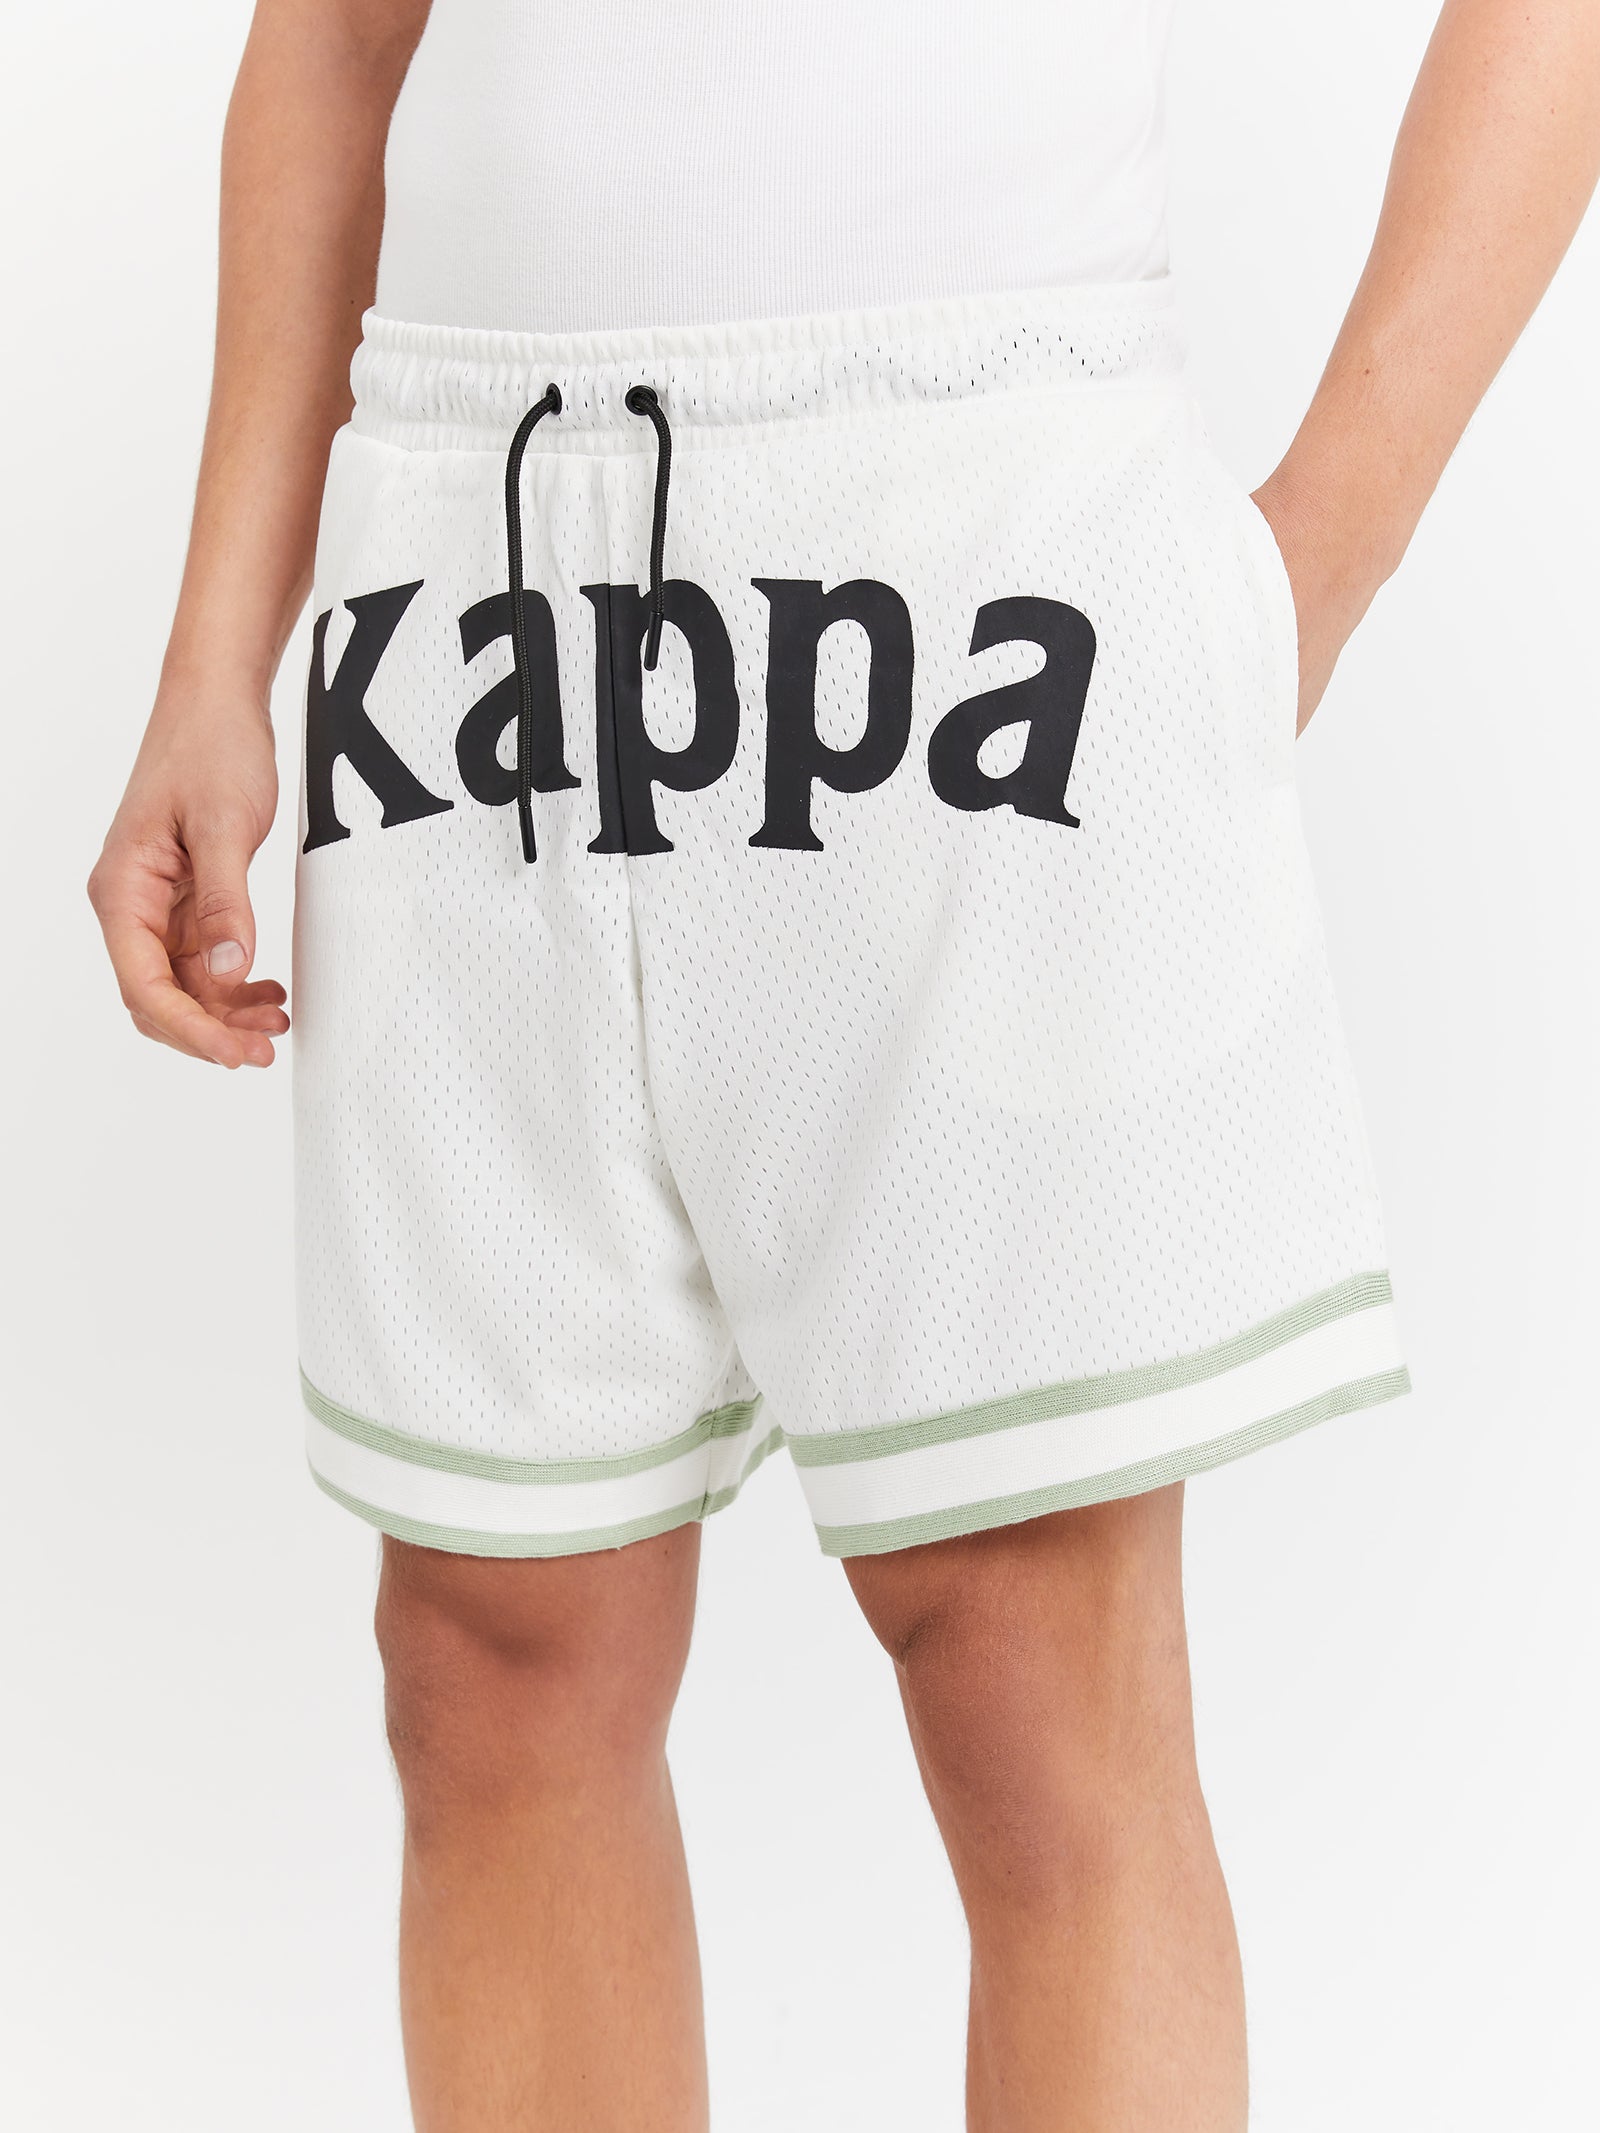 Authentic Dave Shorts in White Bright & Green - Glue Store | Sportshorts